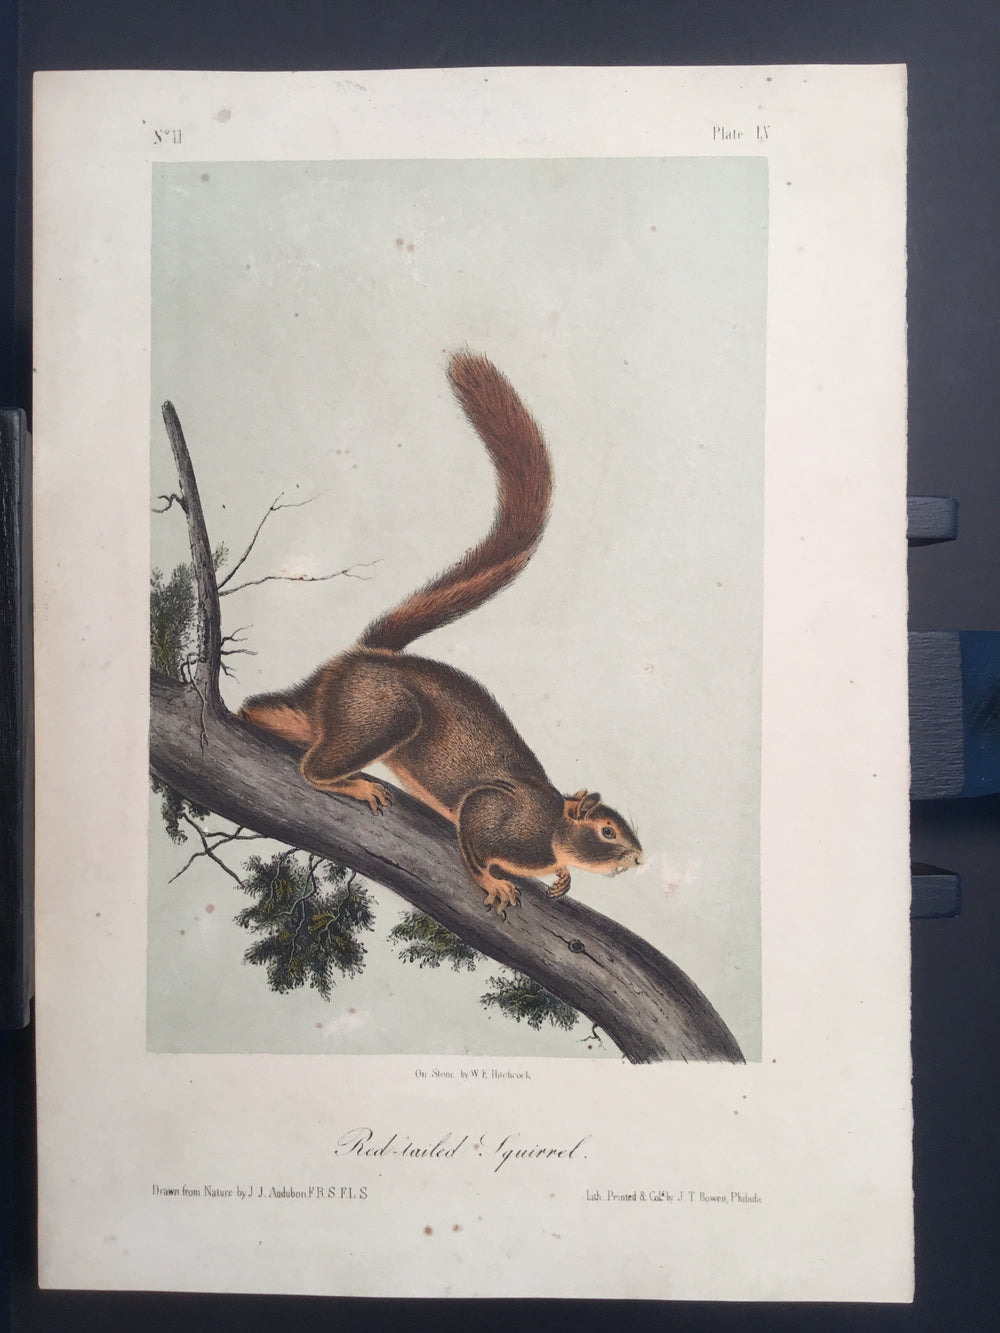 Lord-Hopkins Collection - Red-tailed Squirrel